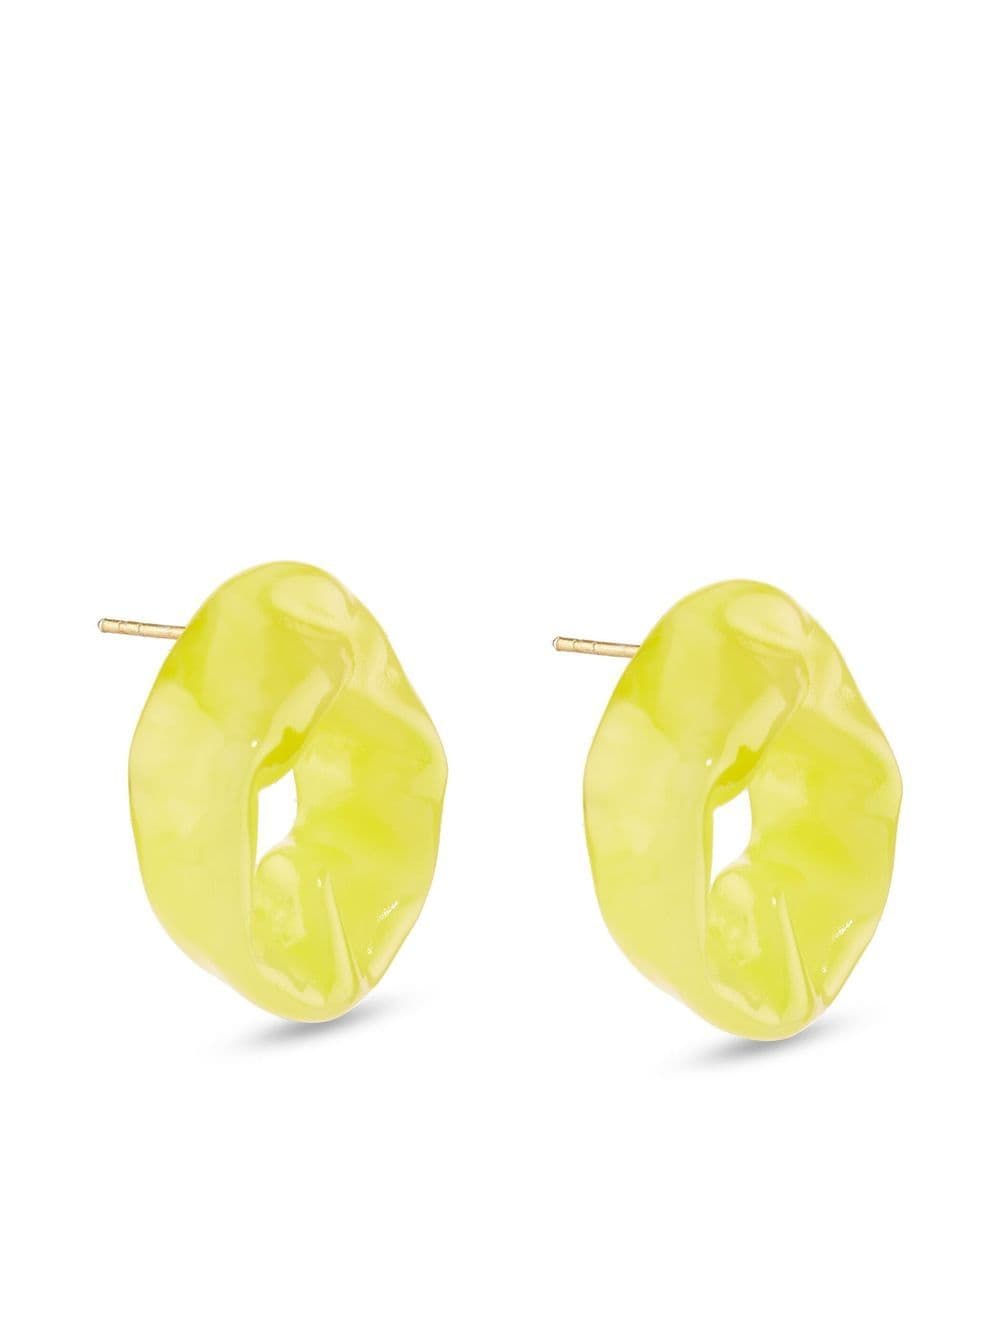 COMPLETEDWORKS-SCRUNCH PEARLESCENT STERLING SILVER EARRINGS BIORESIN-R2021 YELLOW